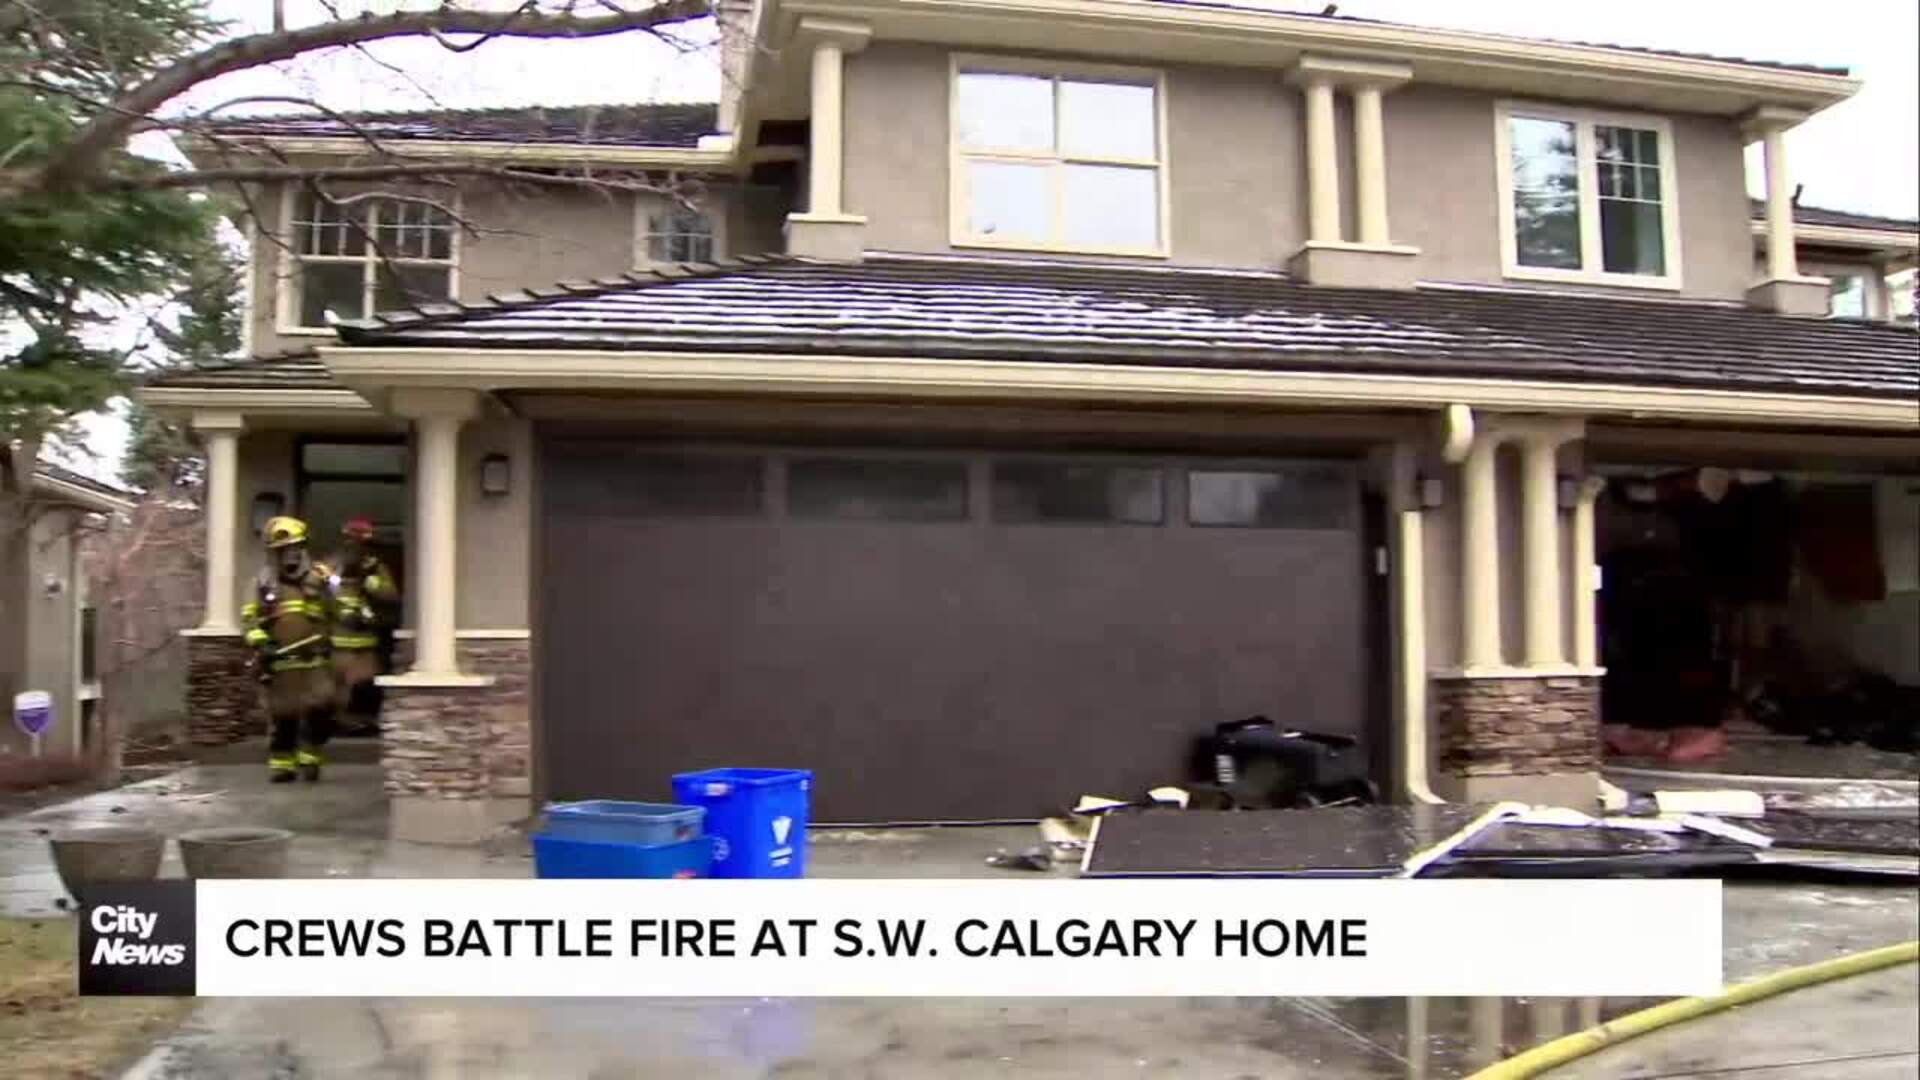 Crews battle fire at S.W. Calgary home